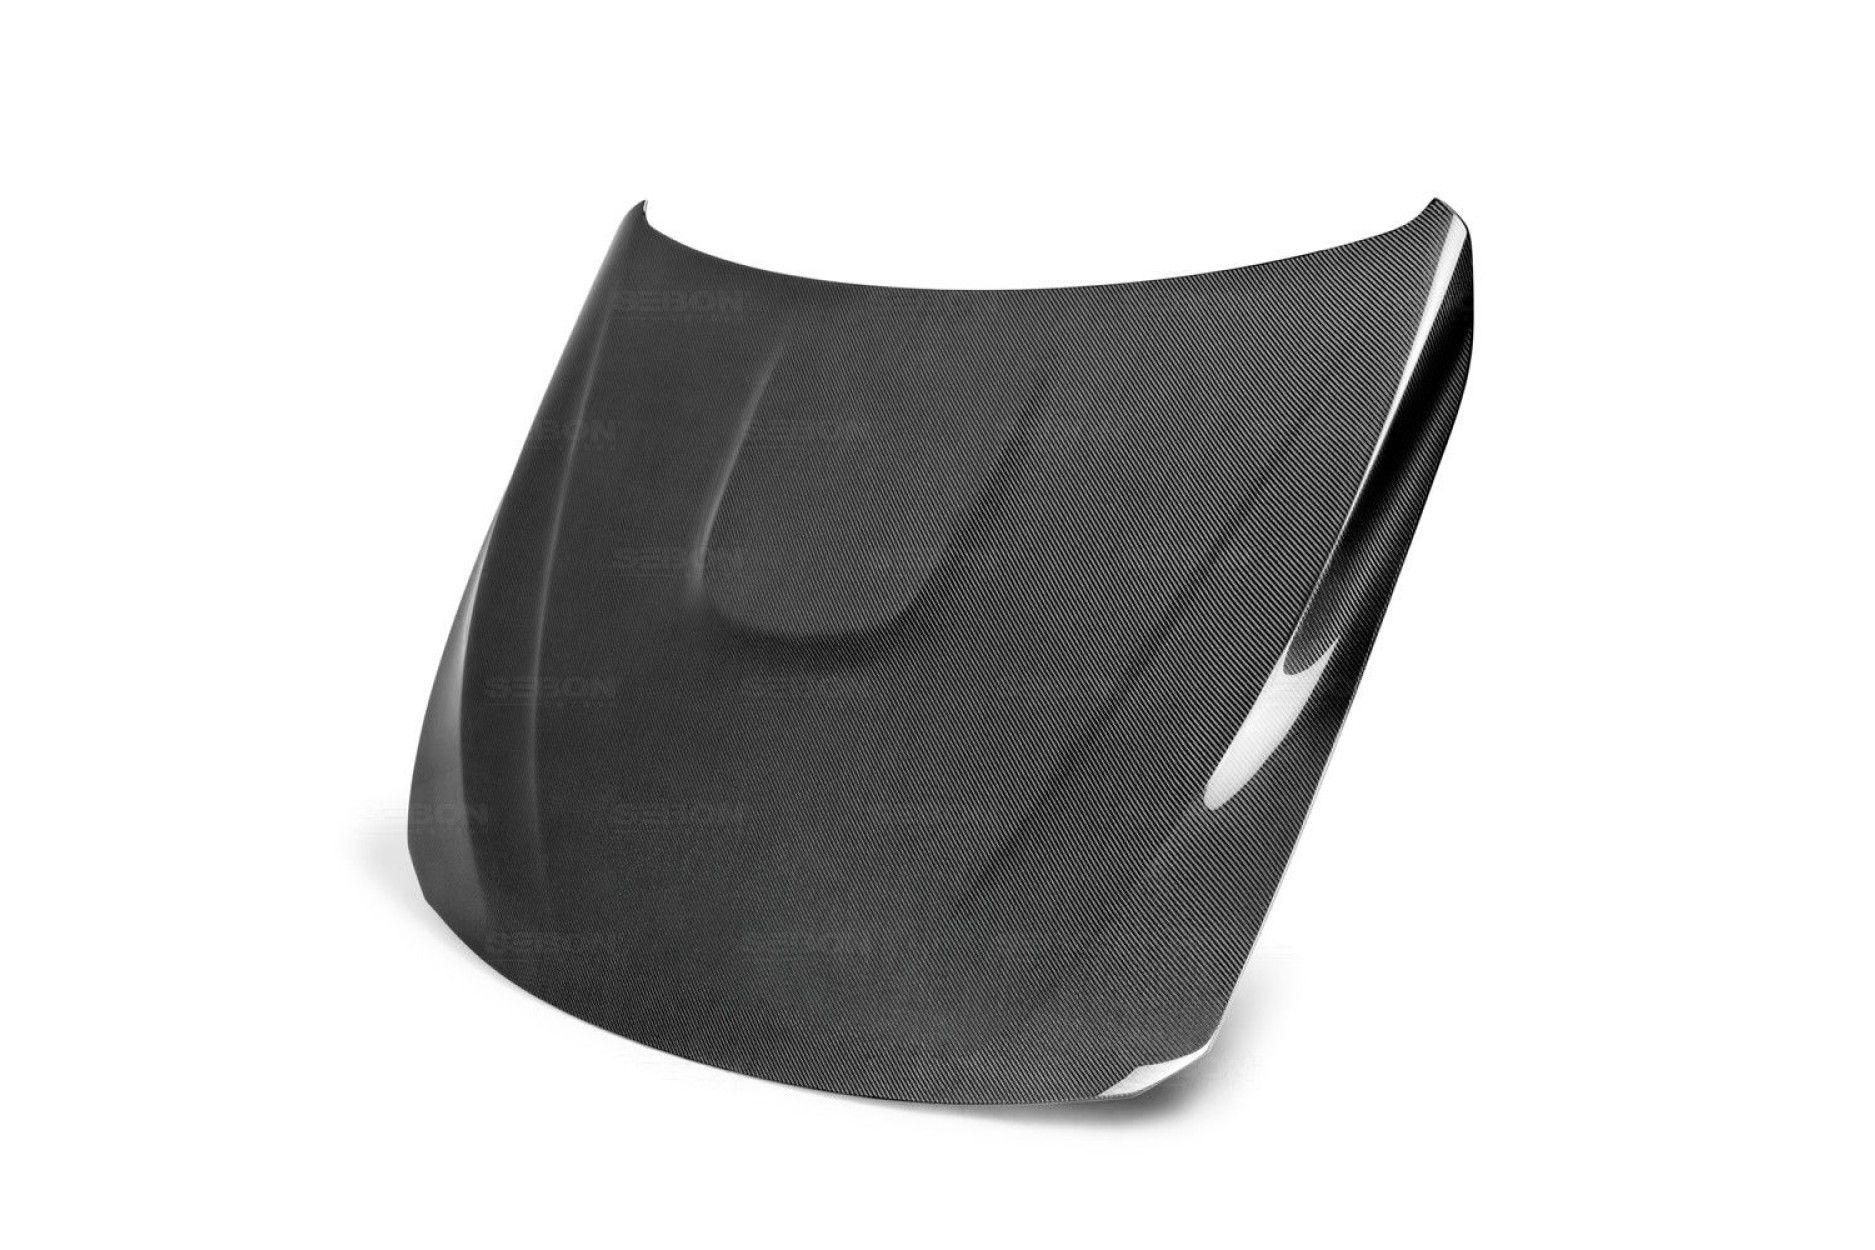 Seibon carbon hood for BMW 3er|4er F80|F82 and M3 M4 coupé and sedan 2014+ OE-Style